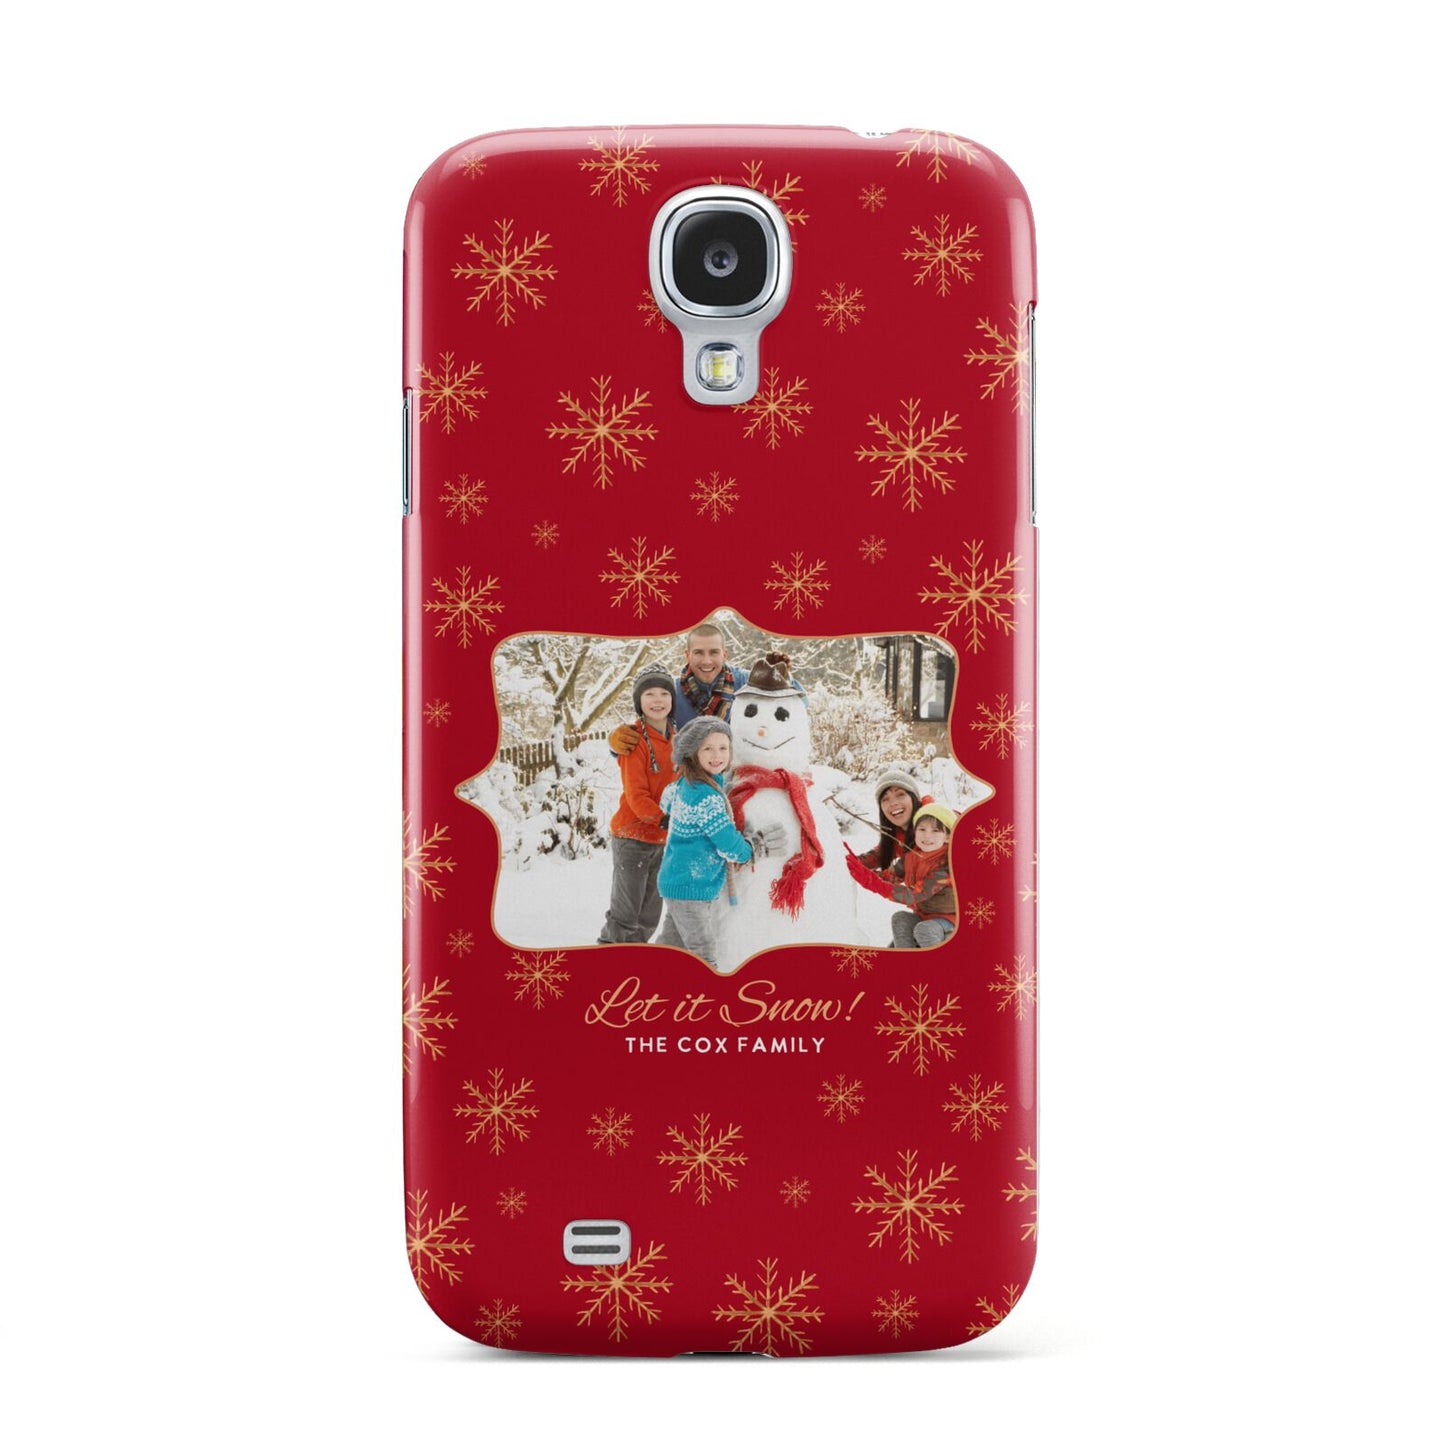 Let it Snow Christmas Photo Upload Samsung Galaxy S4 Case